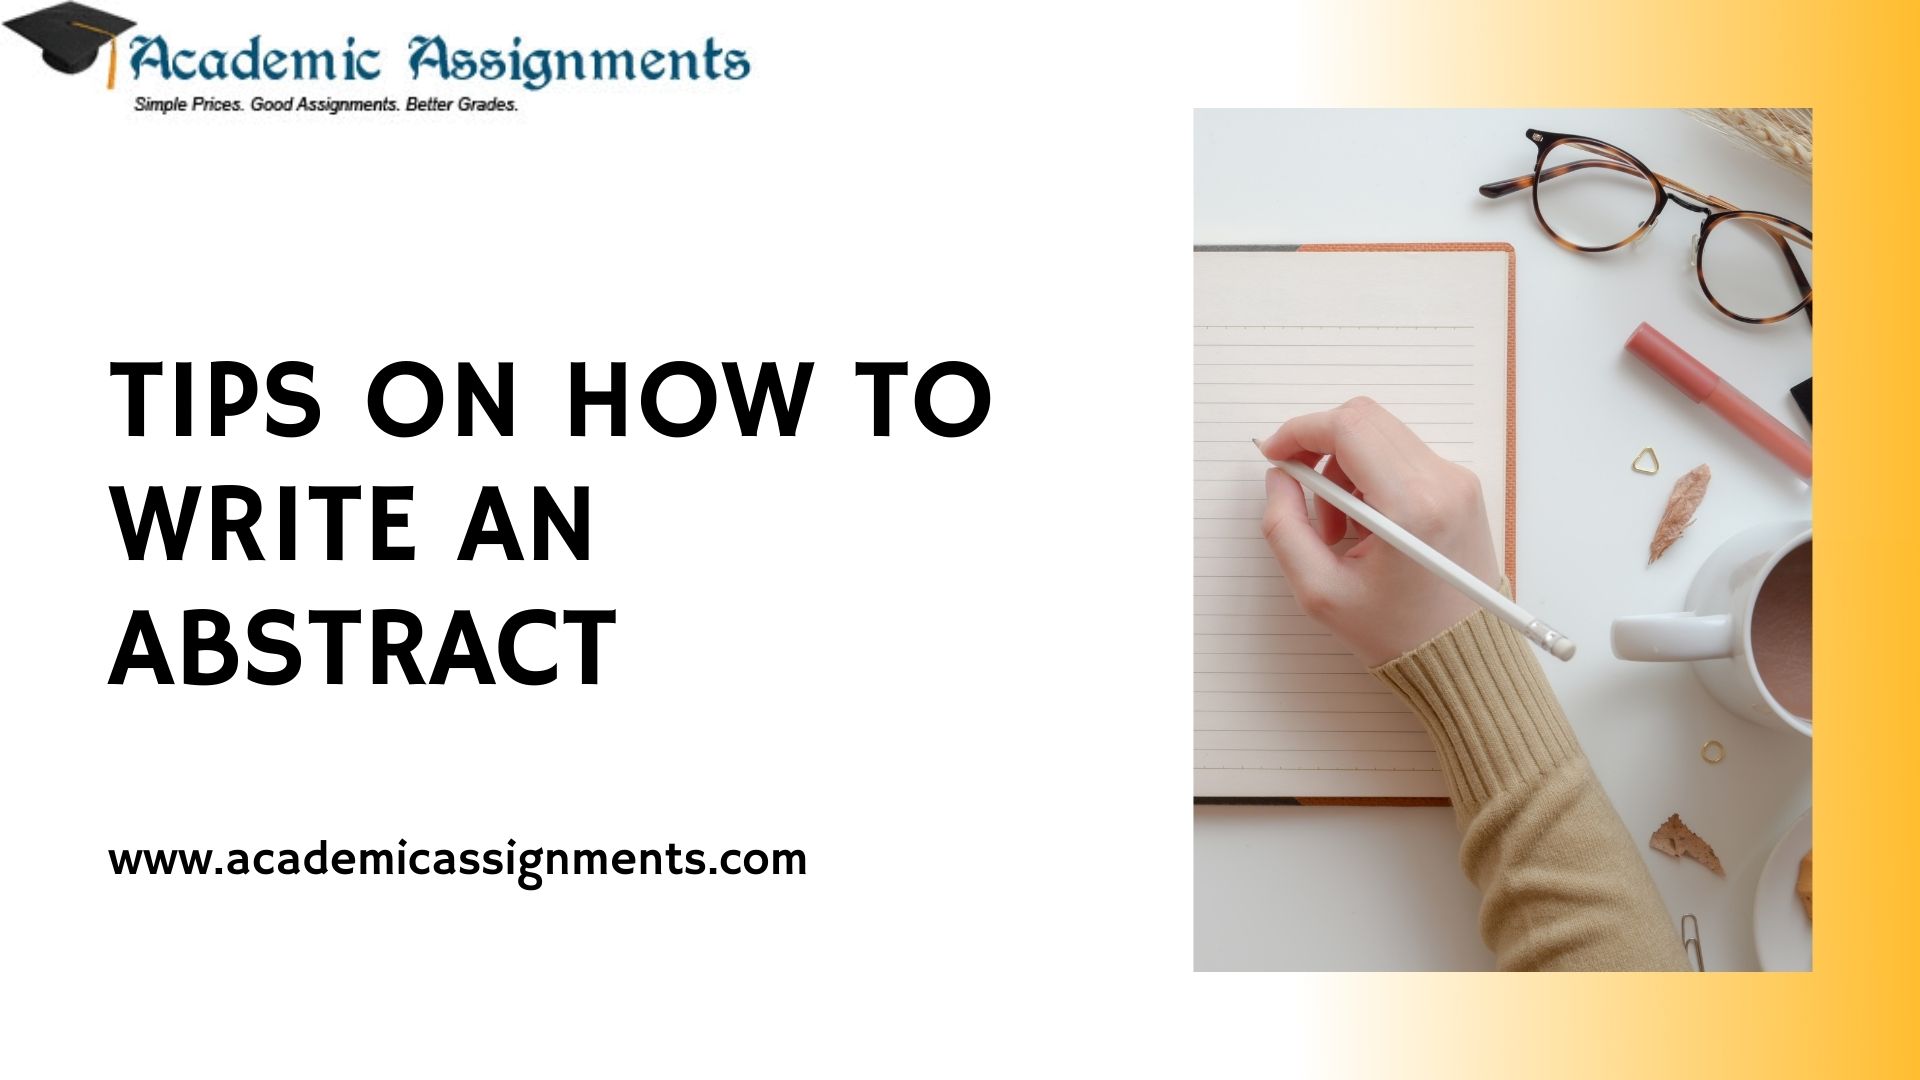 TIPS ON HOW TO WRITE AN ABSTRACT